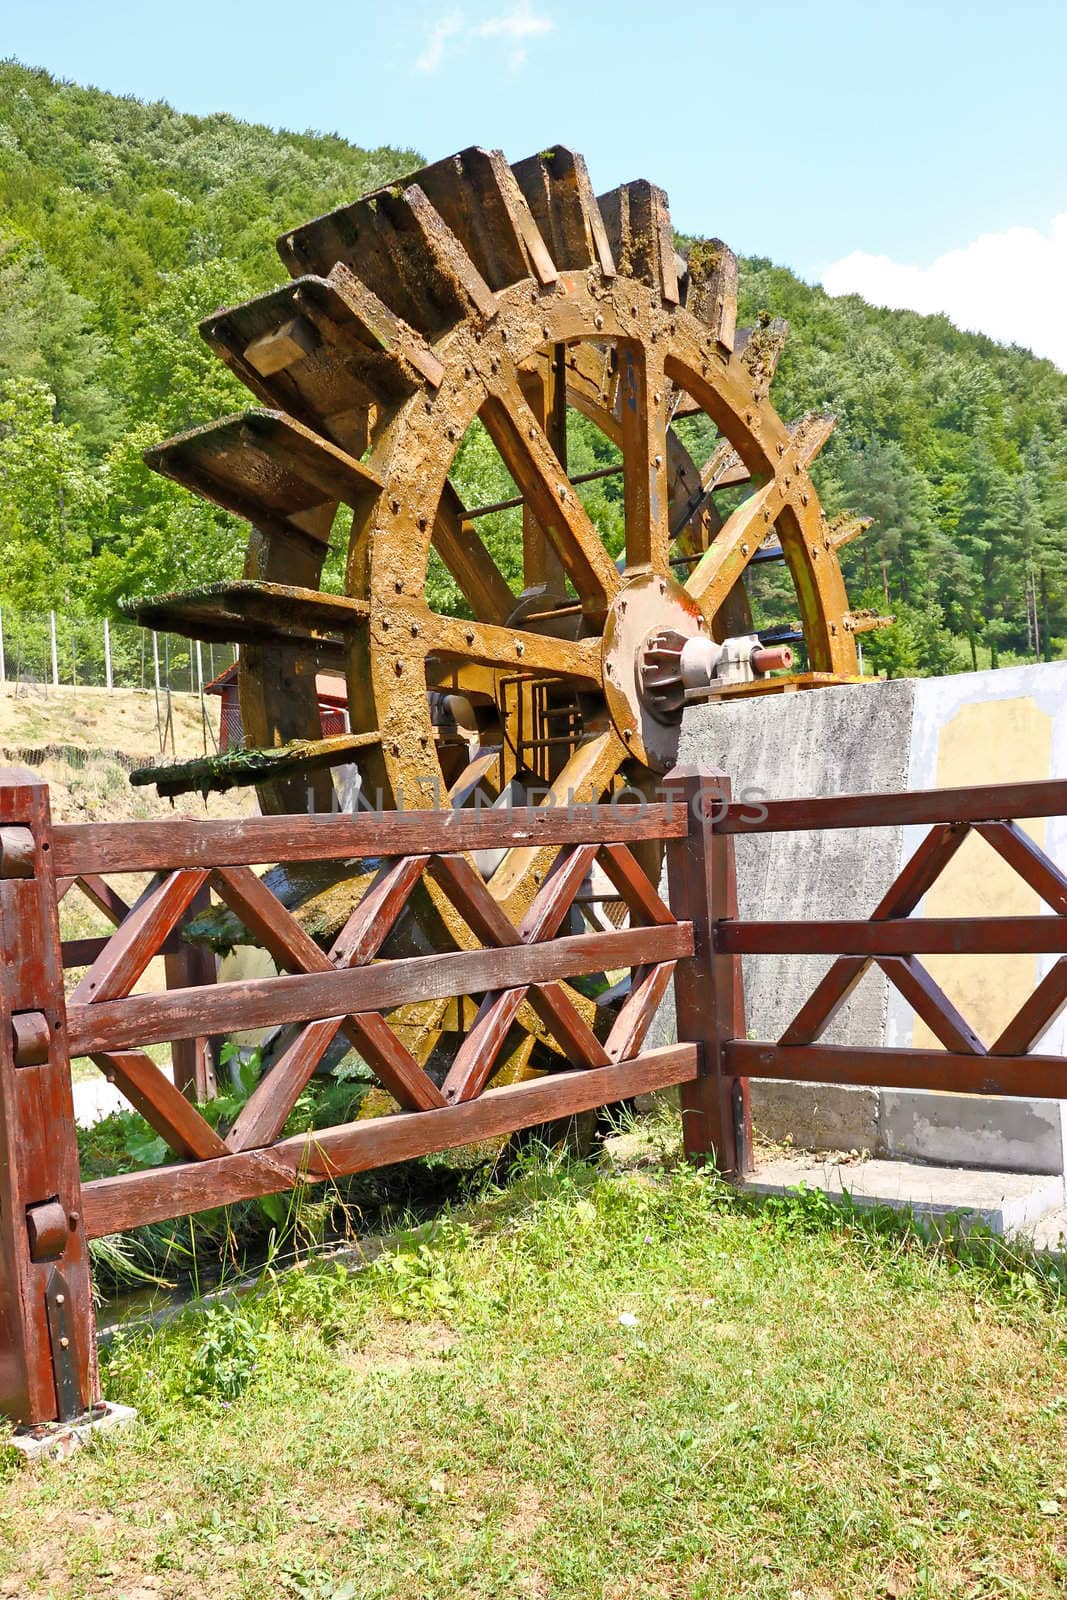 Wooden wheel of an old water mill